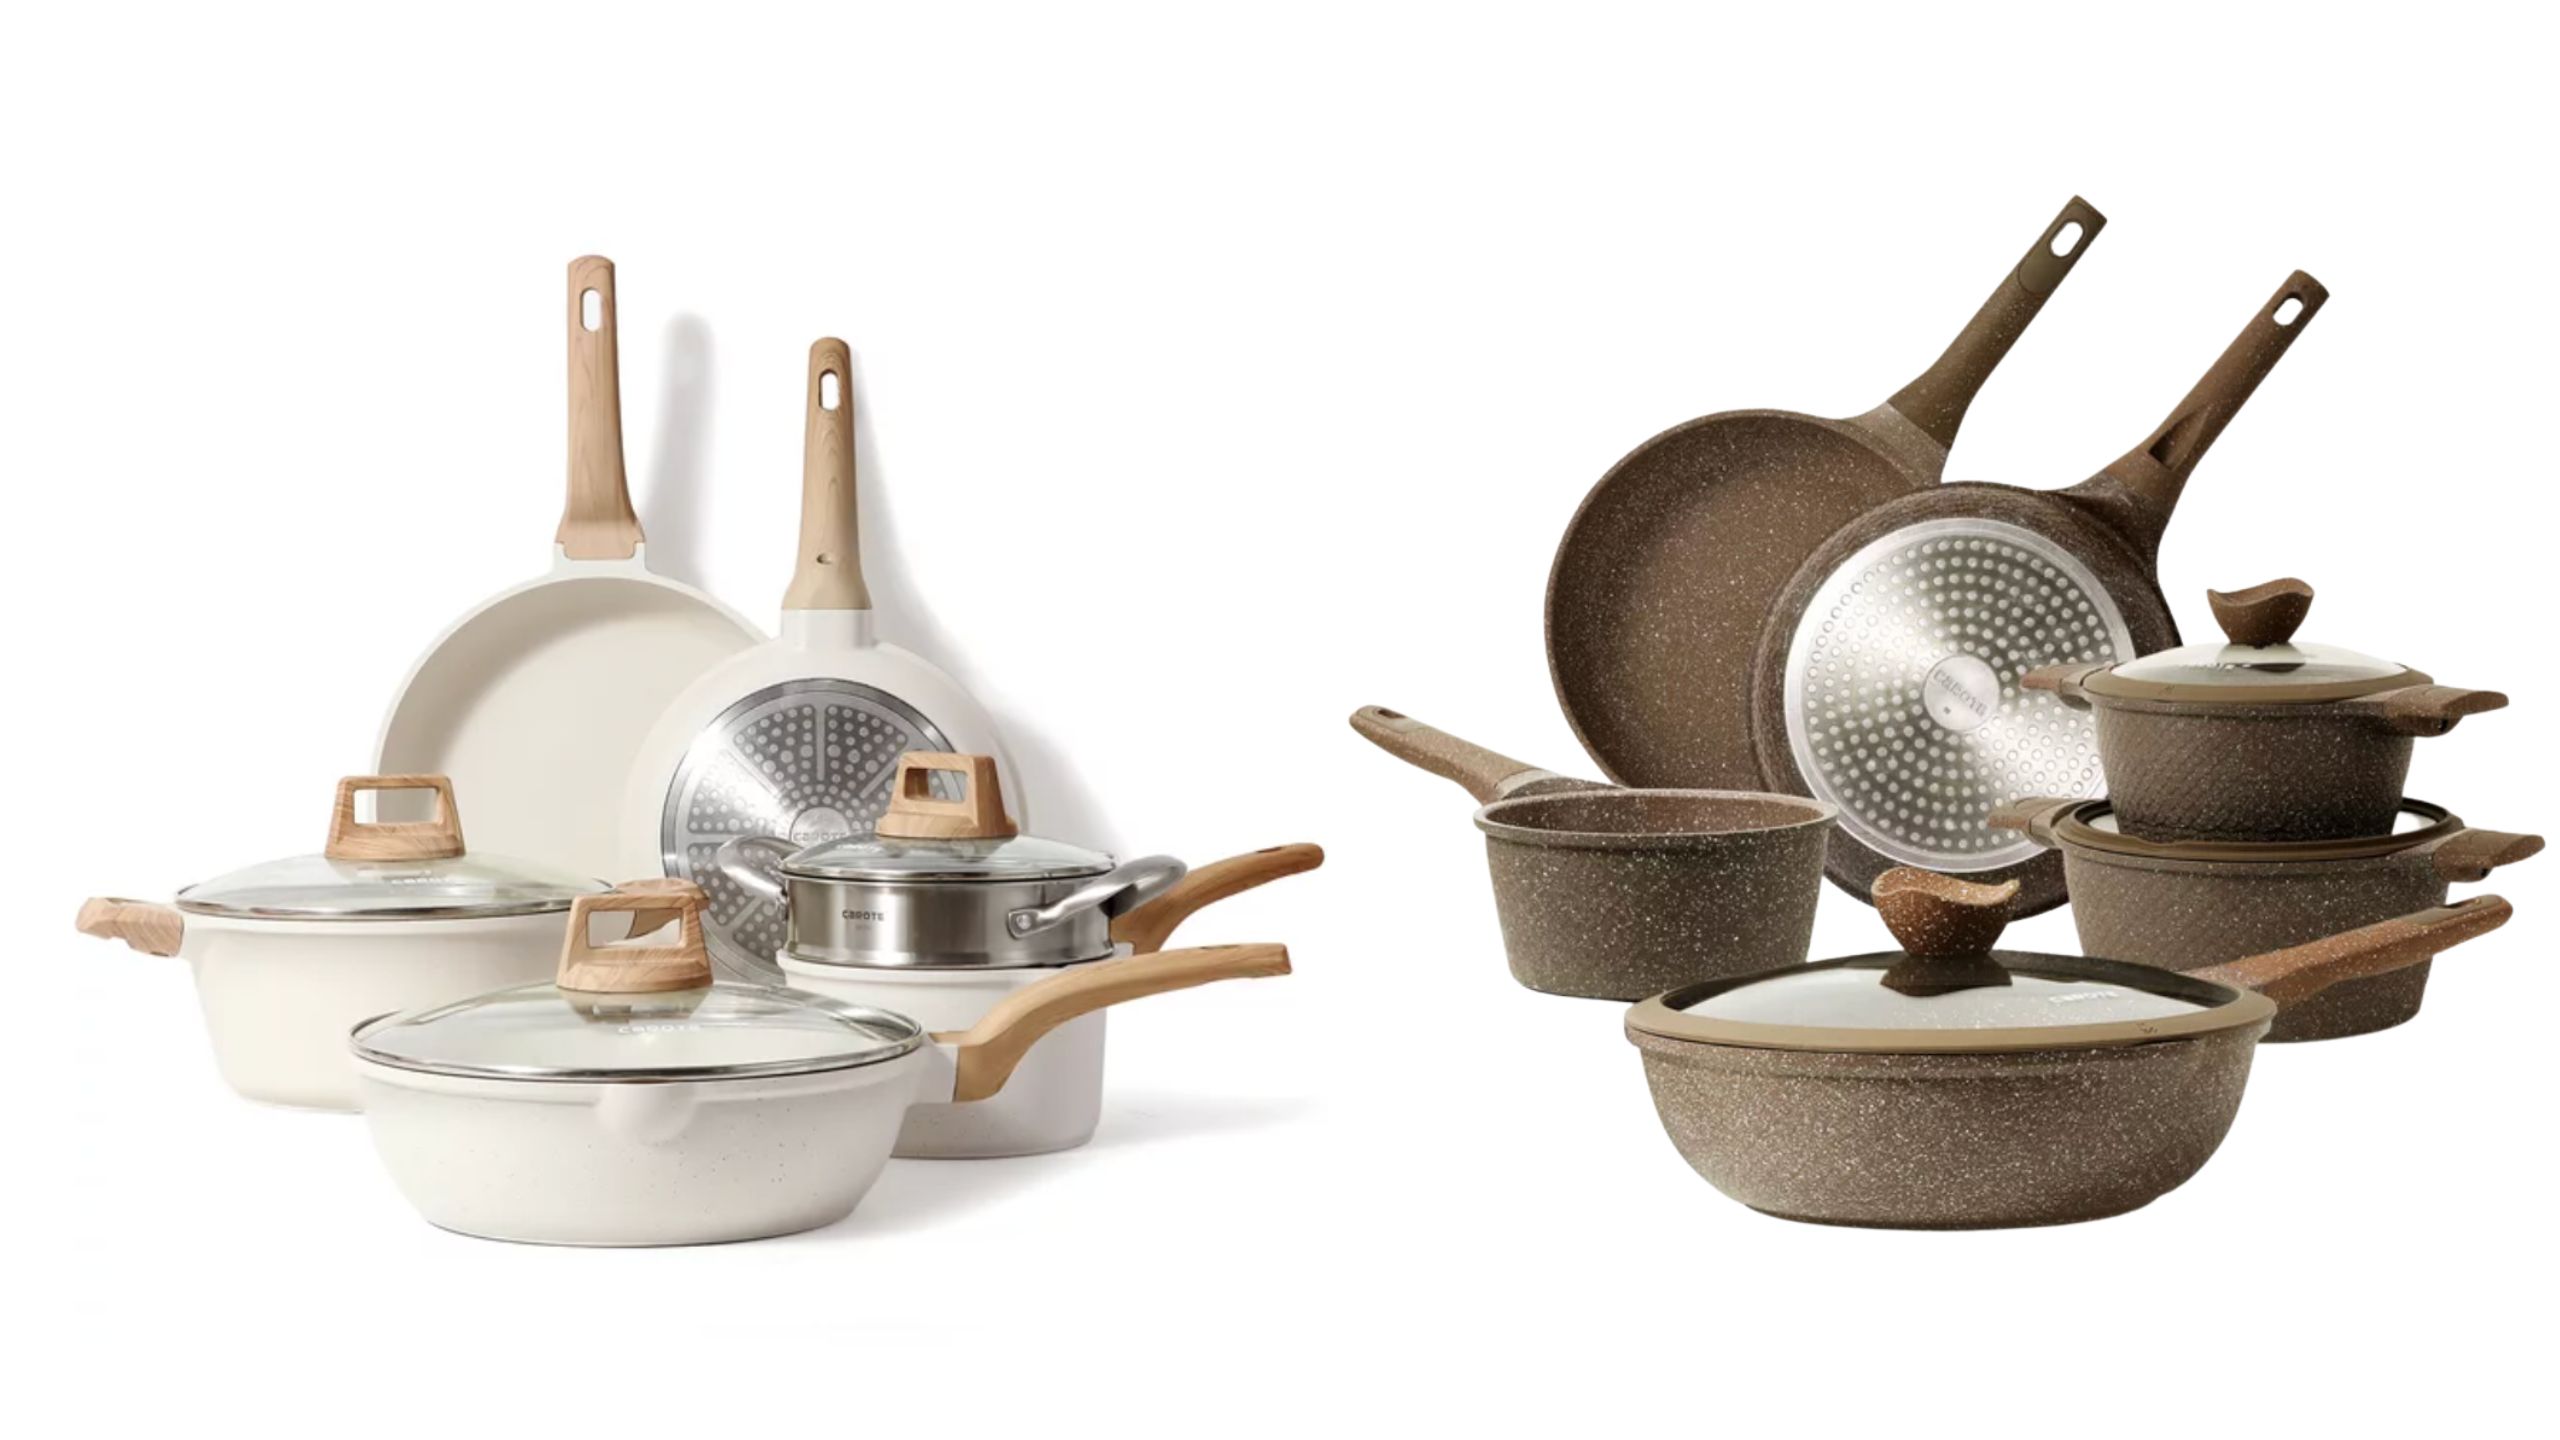 Deal Of The Day: Find Best Offers On Cookware Products From Carote  With Up To 75% Off